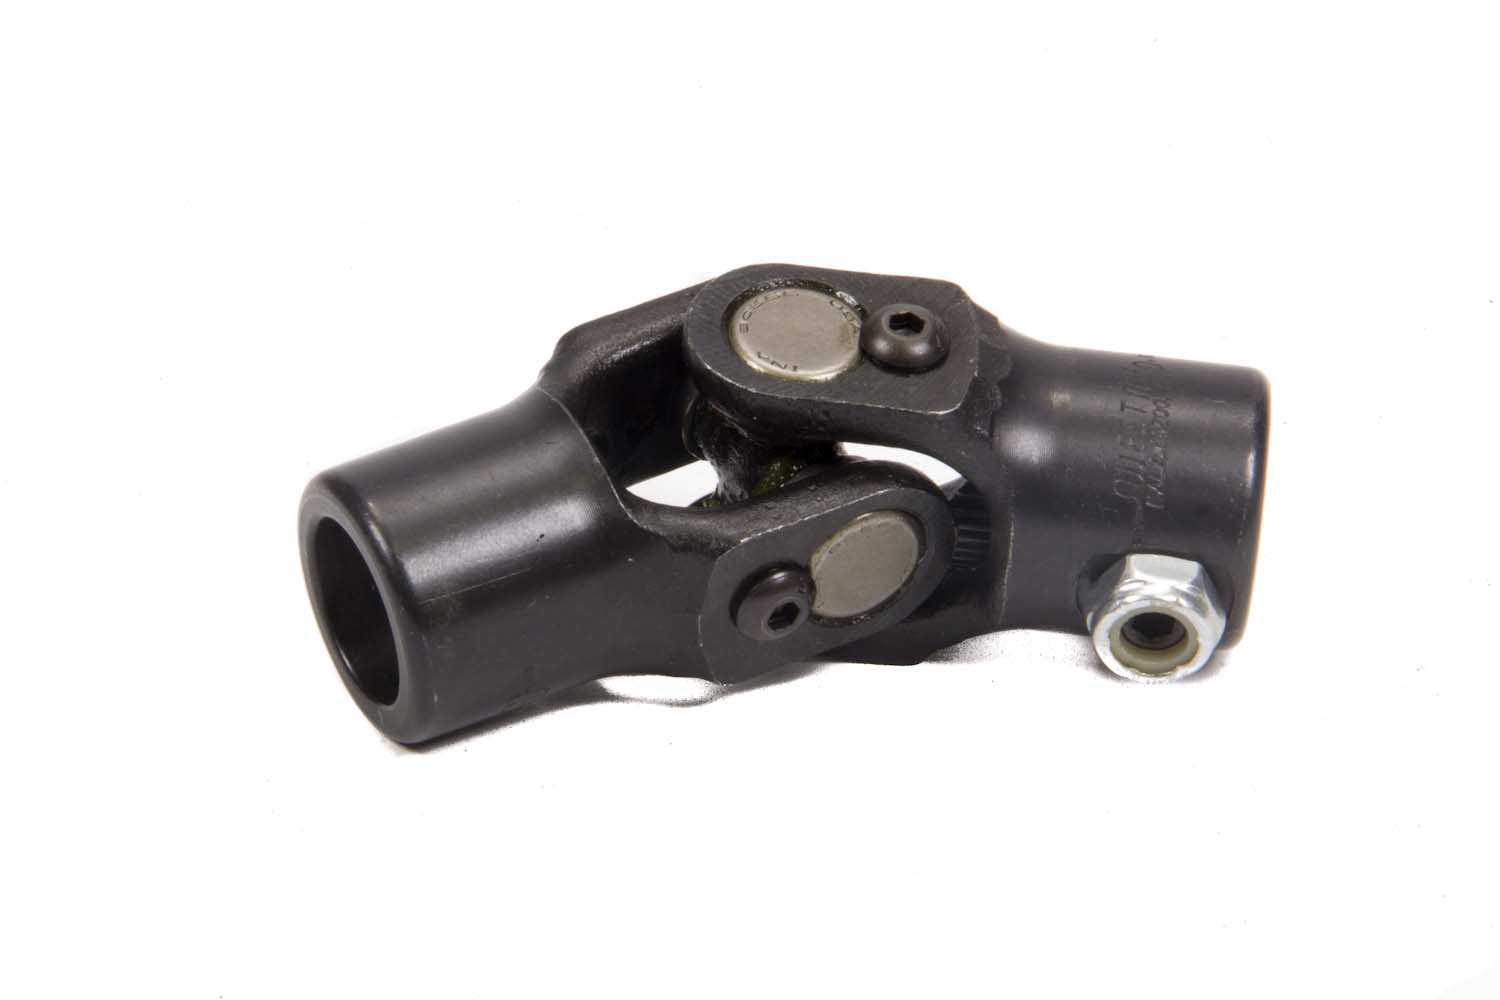 Sweet Manufacturing 401-50618 Steering Universal Joint, Single Joint, 3/4 in Smooth Bore to 1 in 48 Spline, Steel, Black Paint, Each